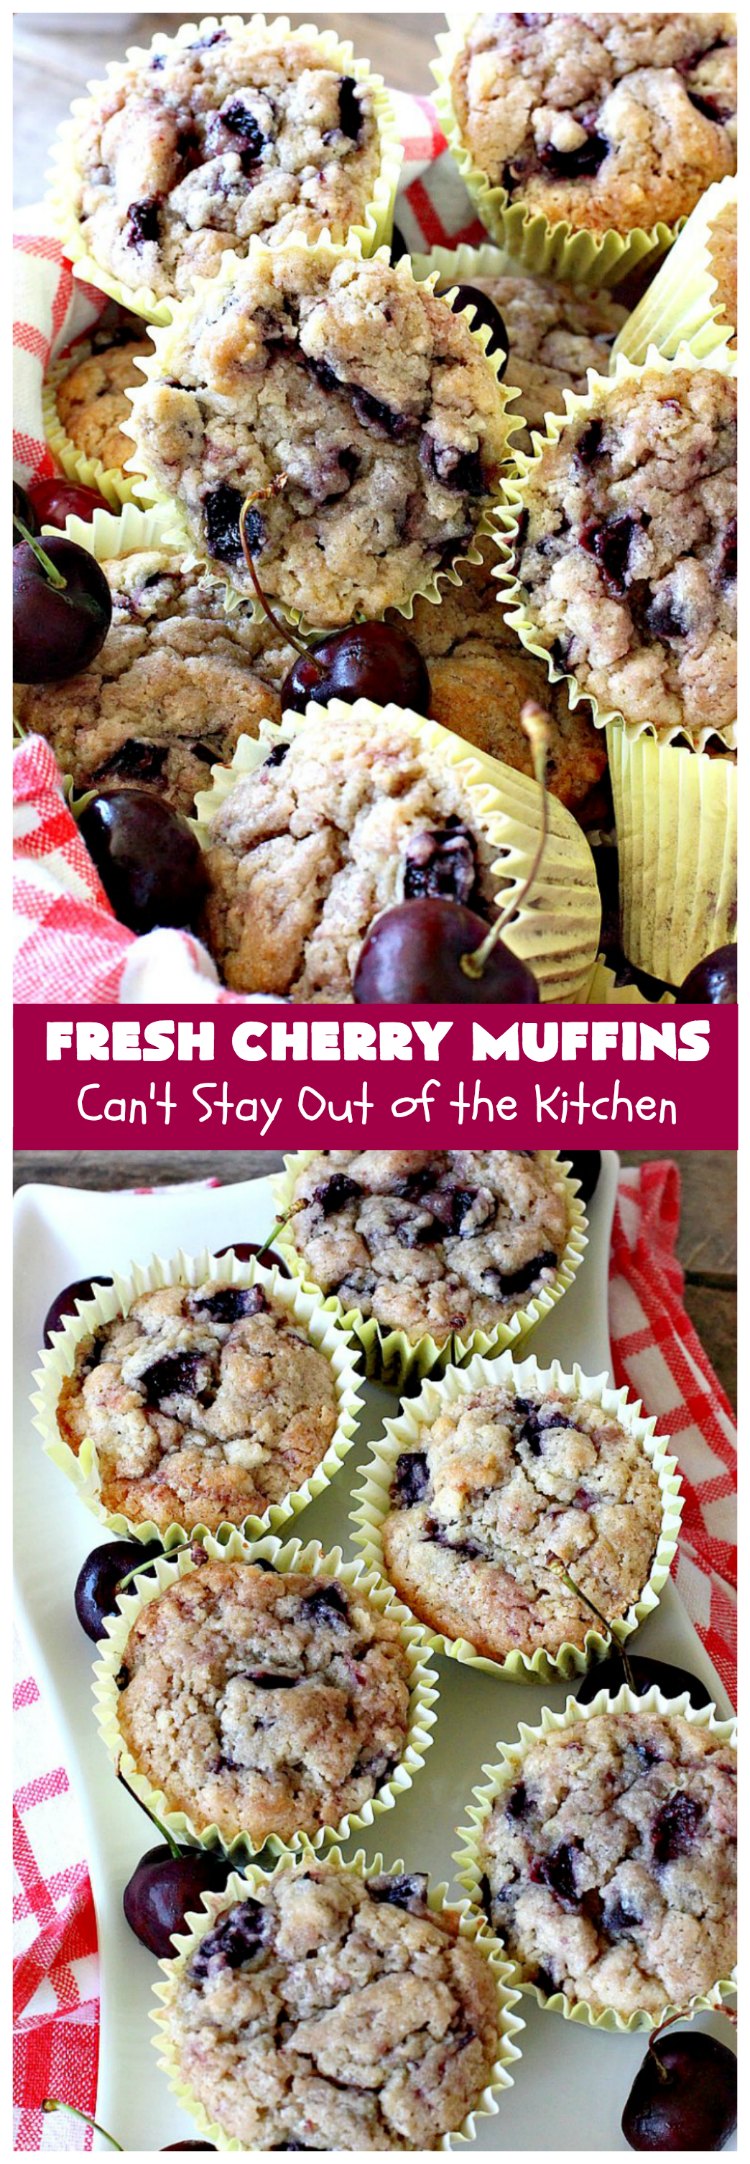 Fresh Cherry Muffins | Can't Stay Out of the Kitchen